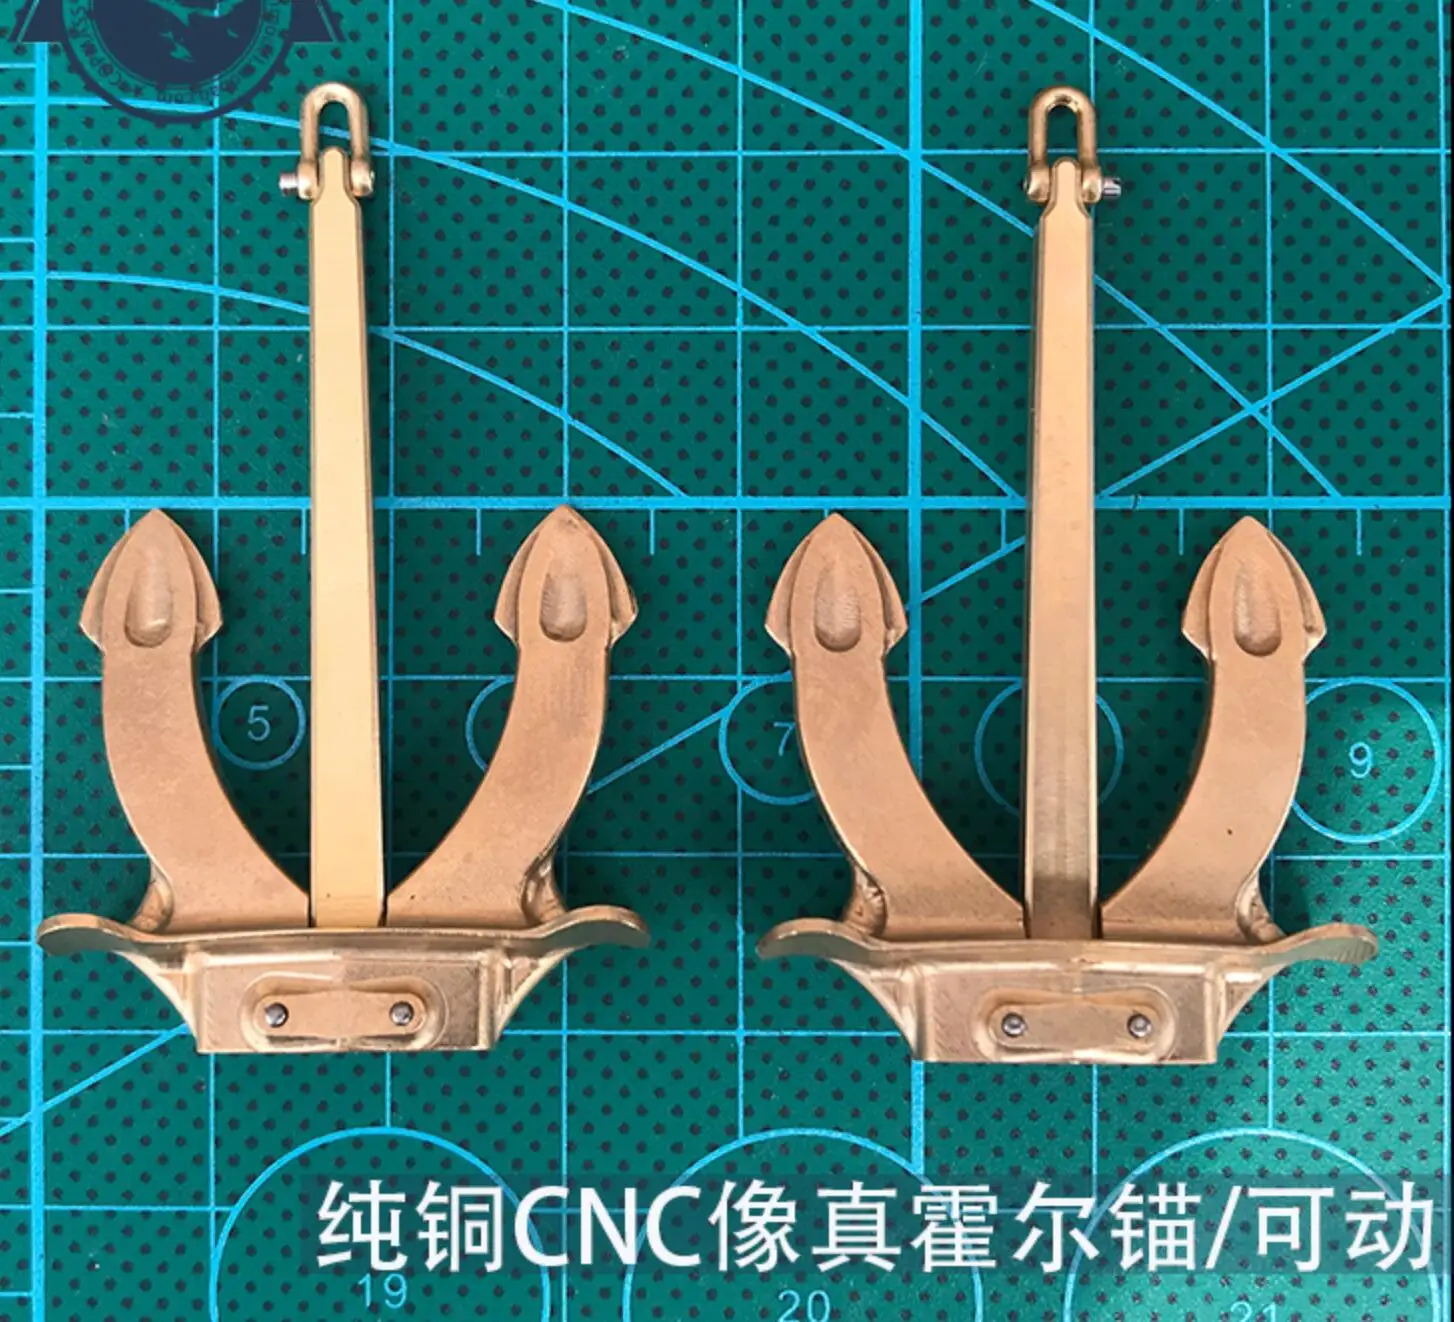 CNC Pure copper Hall Anchor Scale 1/150 RC model ship kit fittings- 1 pieces